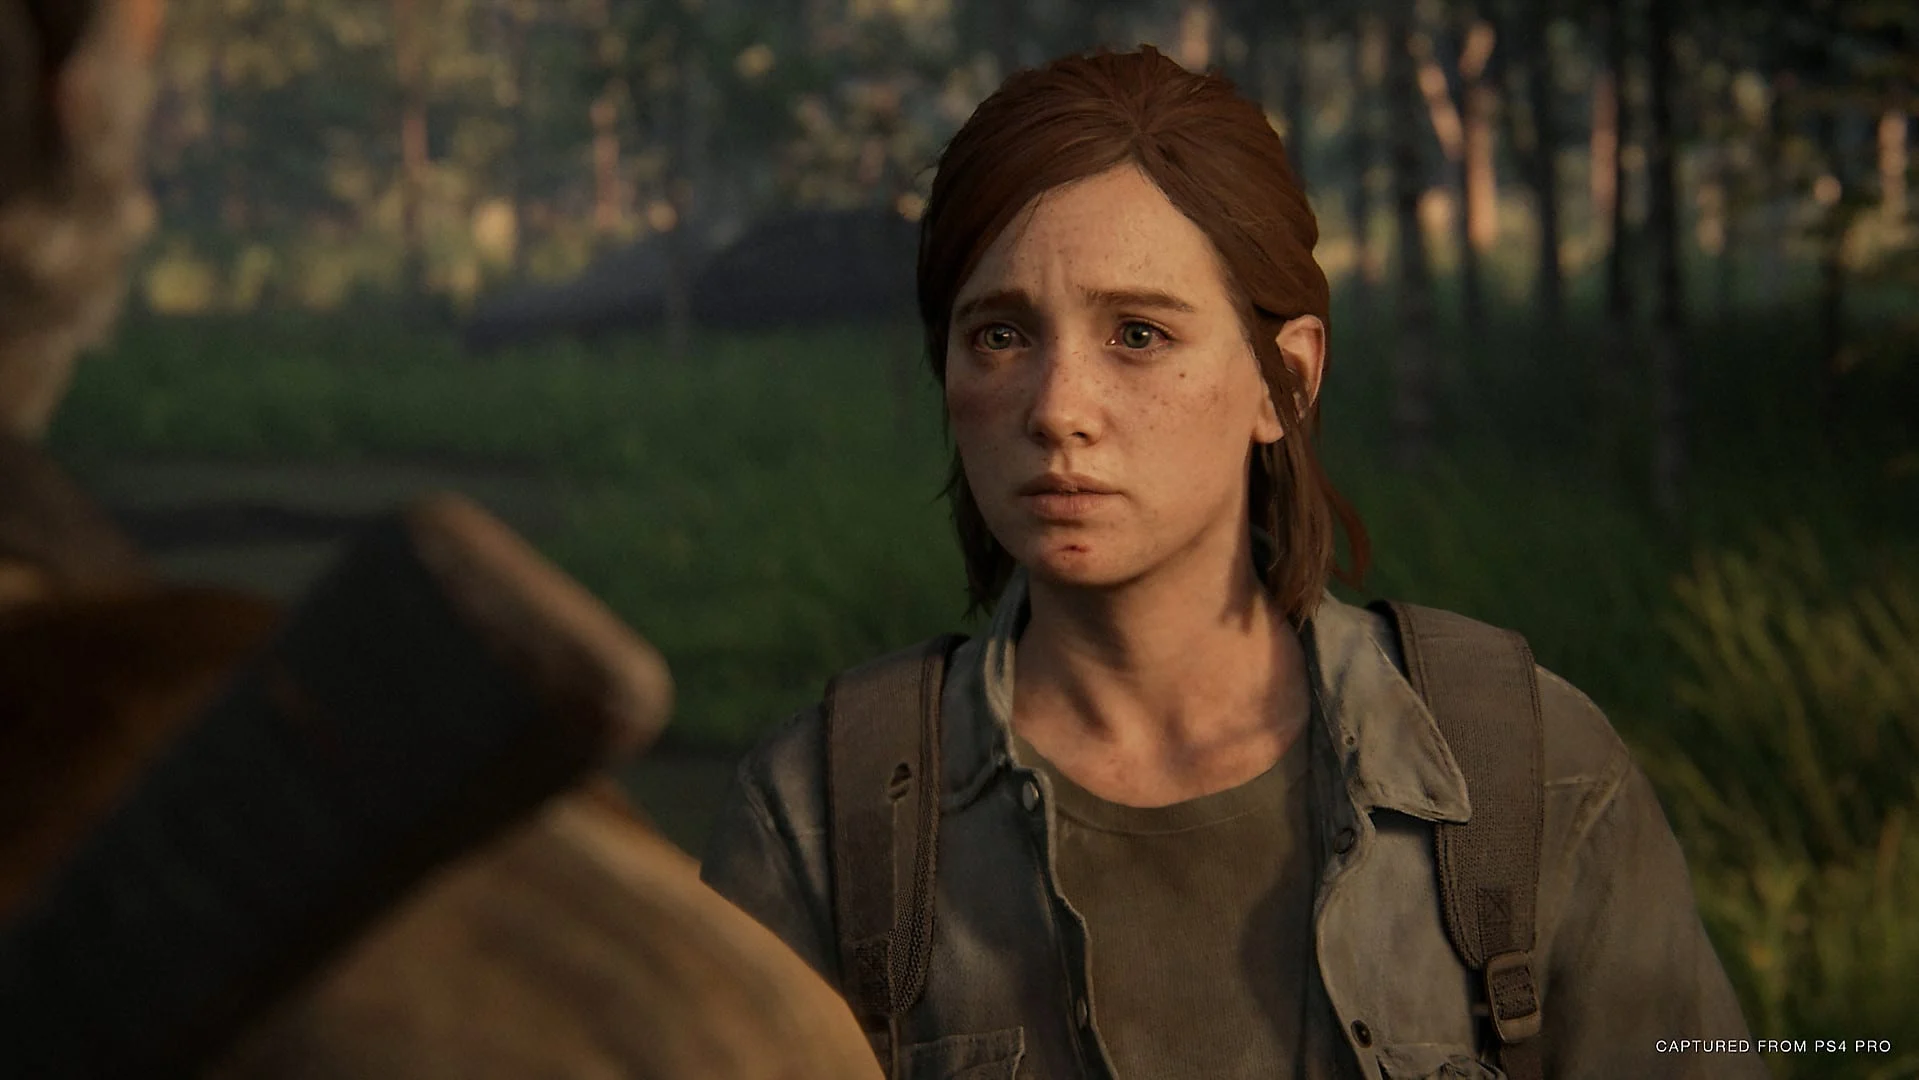 The Last of Us Part 2 rewards players with an Easter egg after completing Grounded and Permadeath difficulties